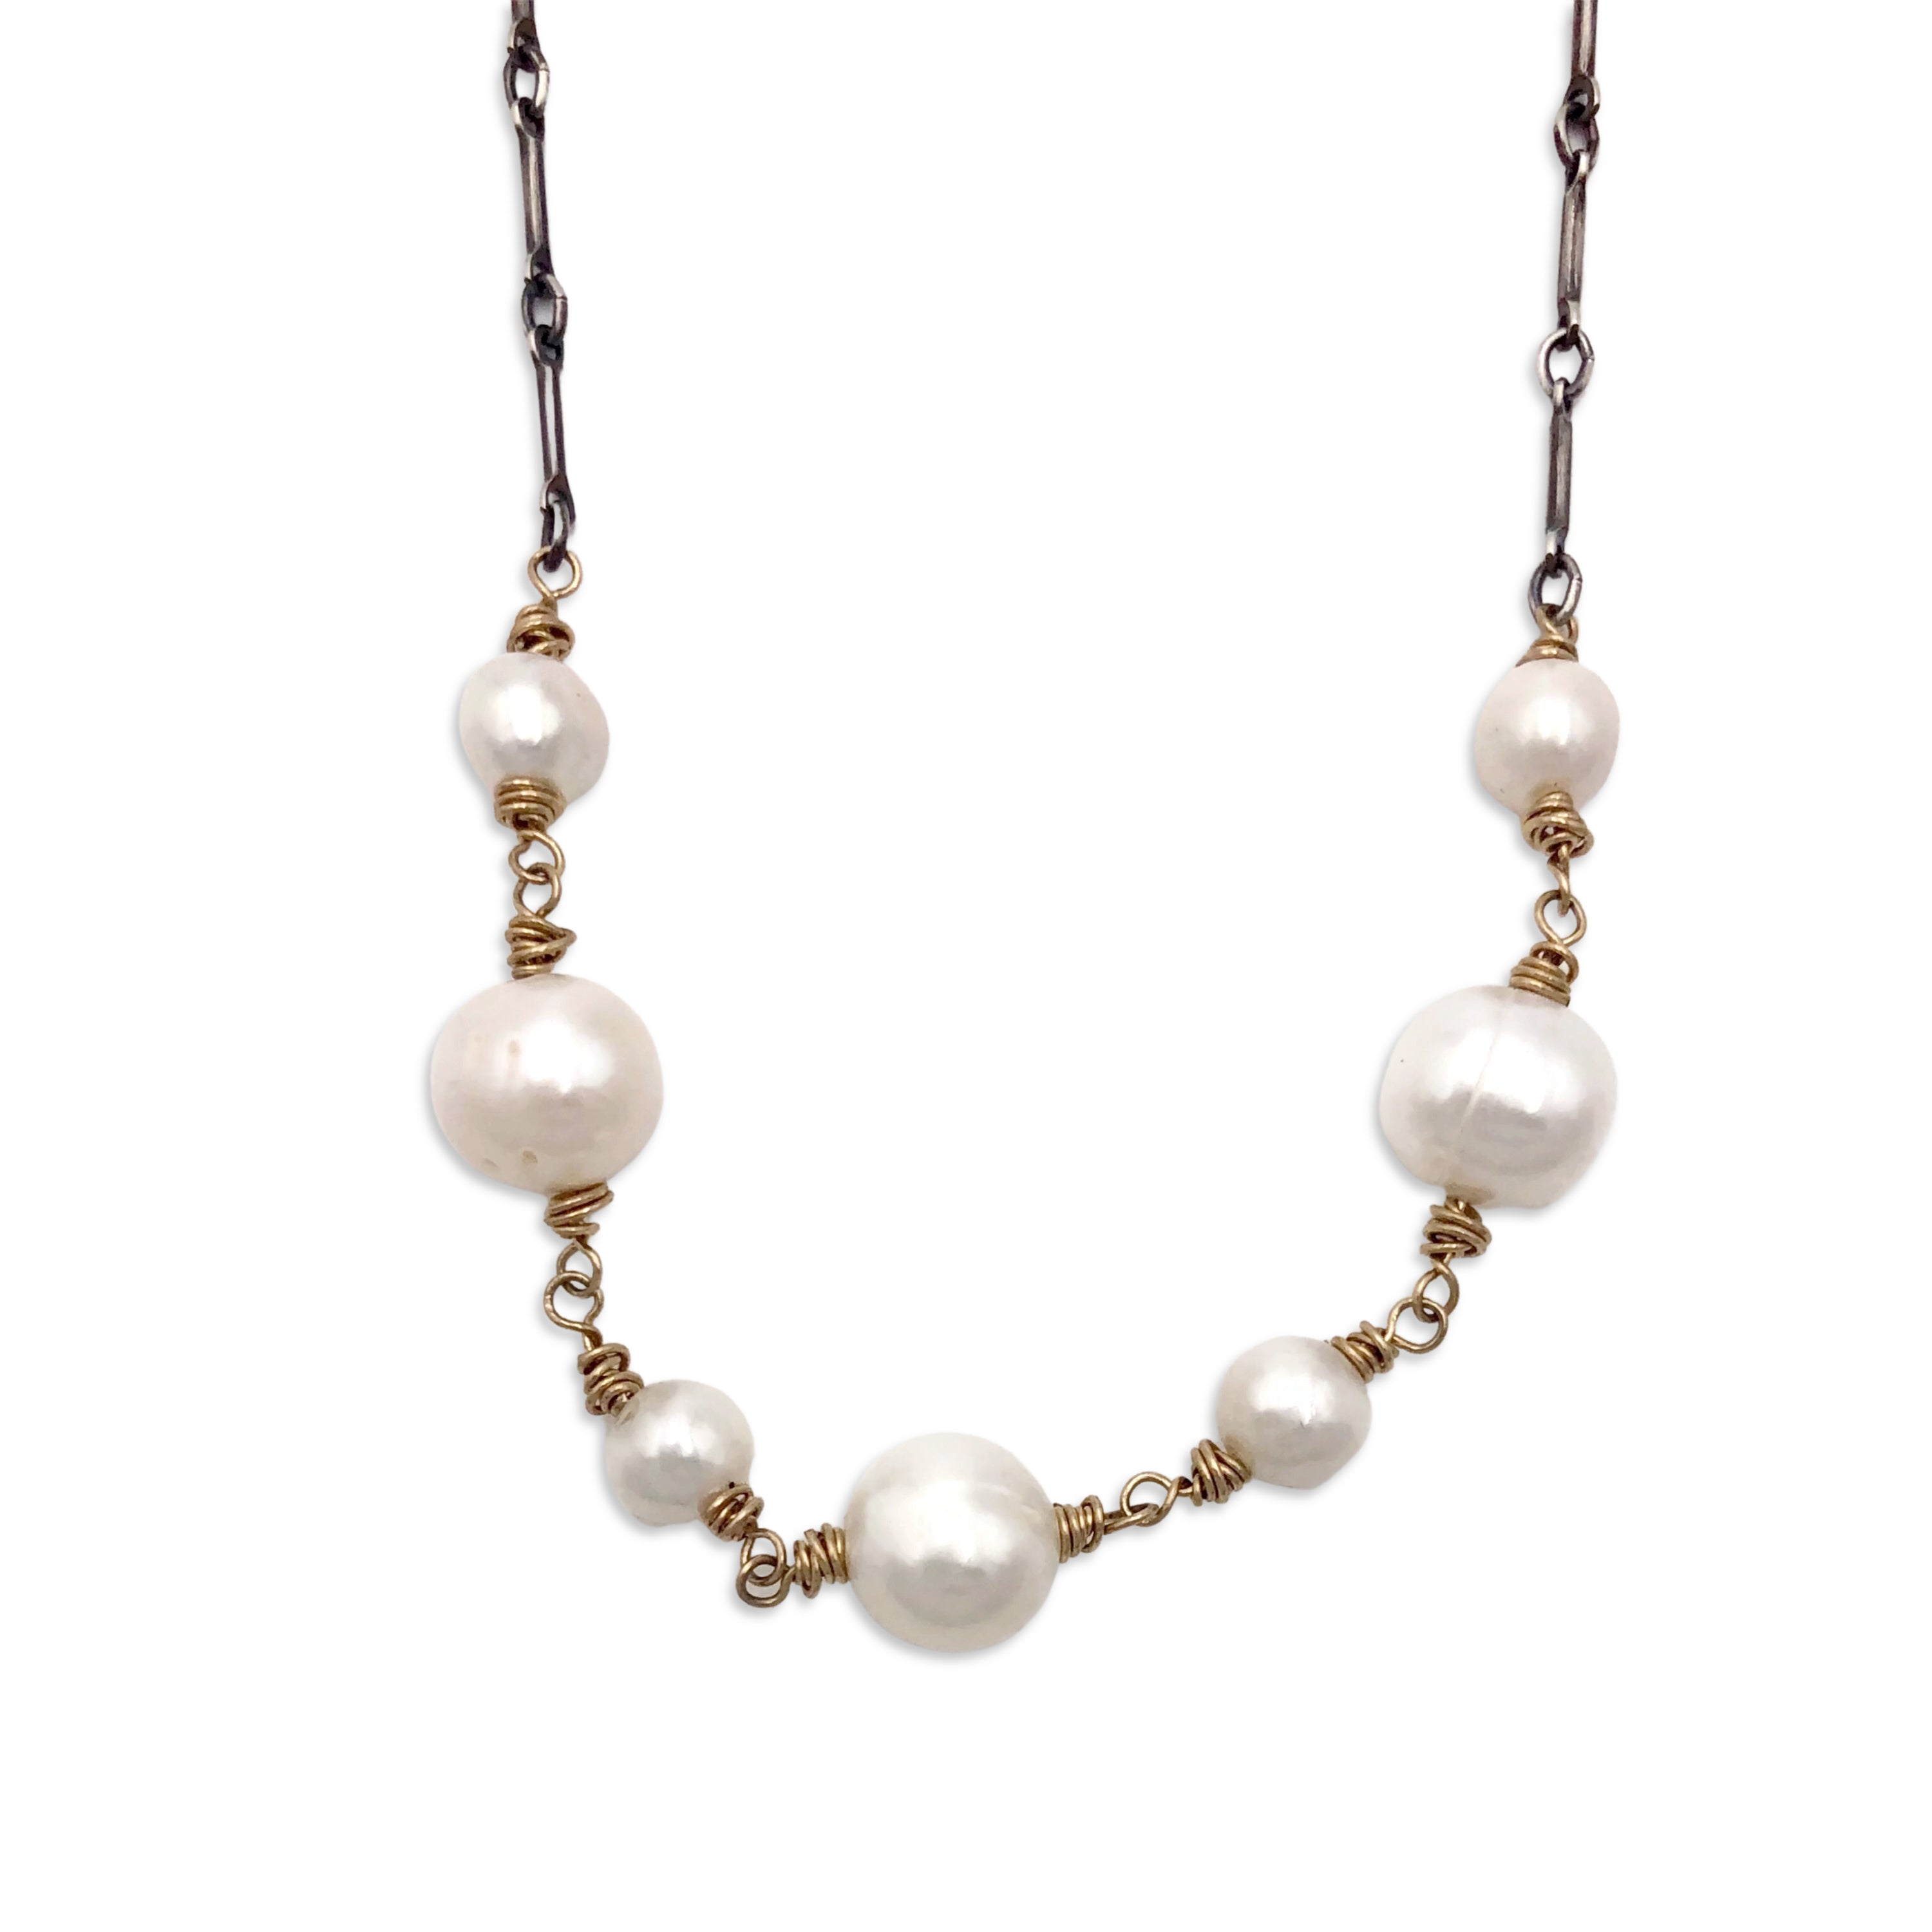 Pearl Necklace with sterling silver and gold fill wire